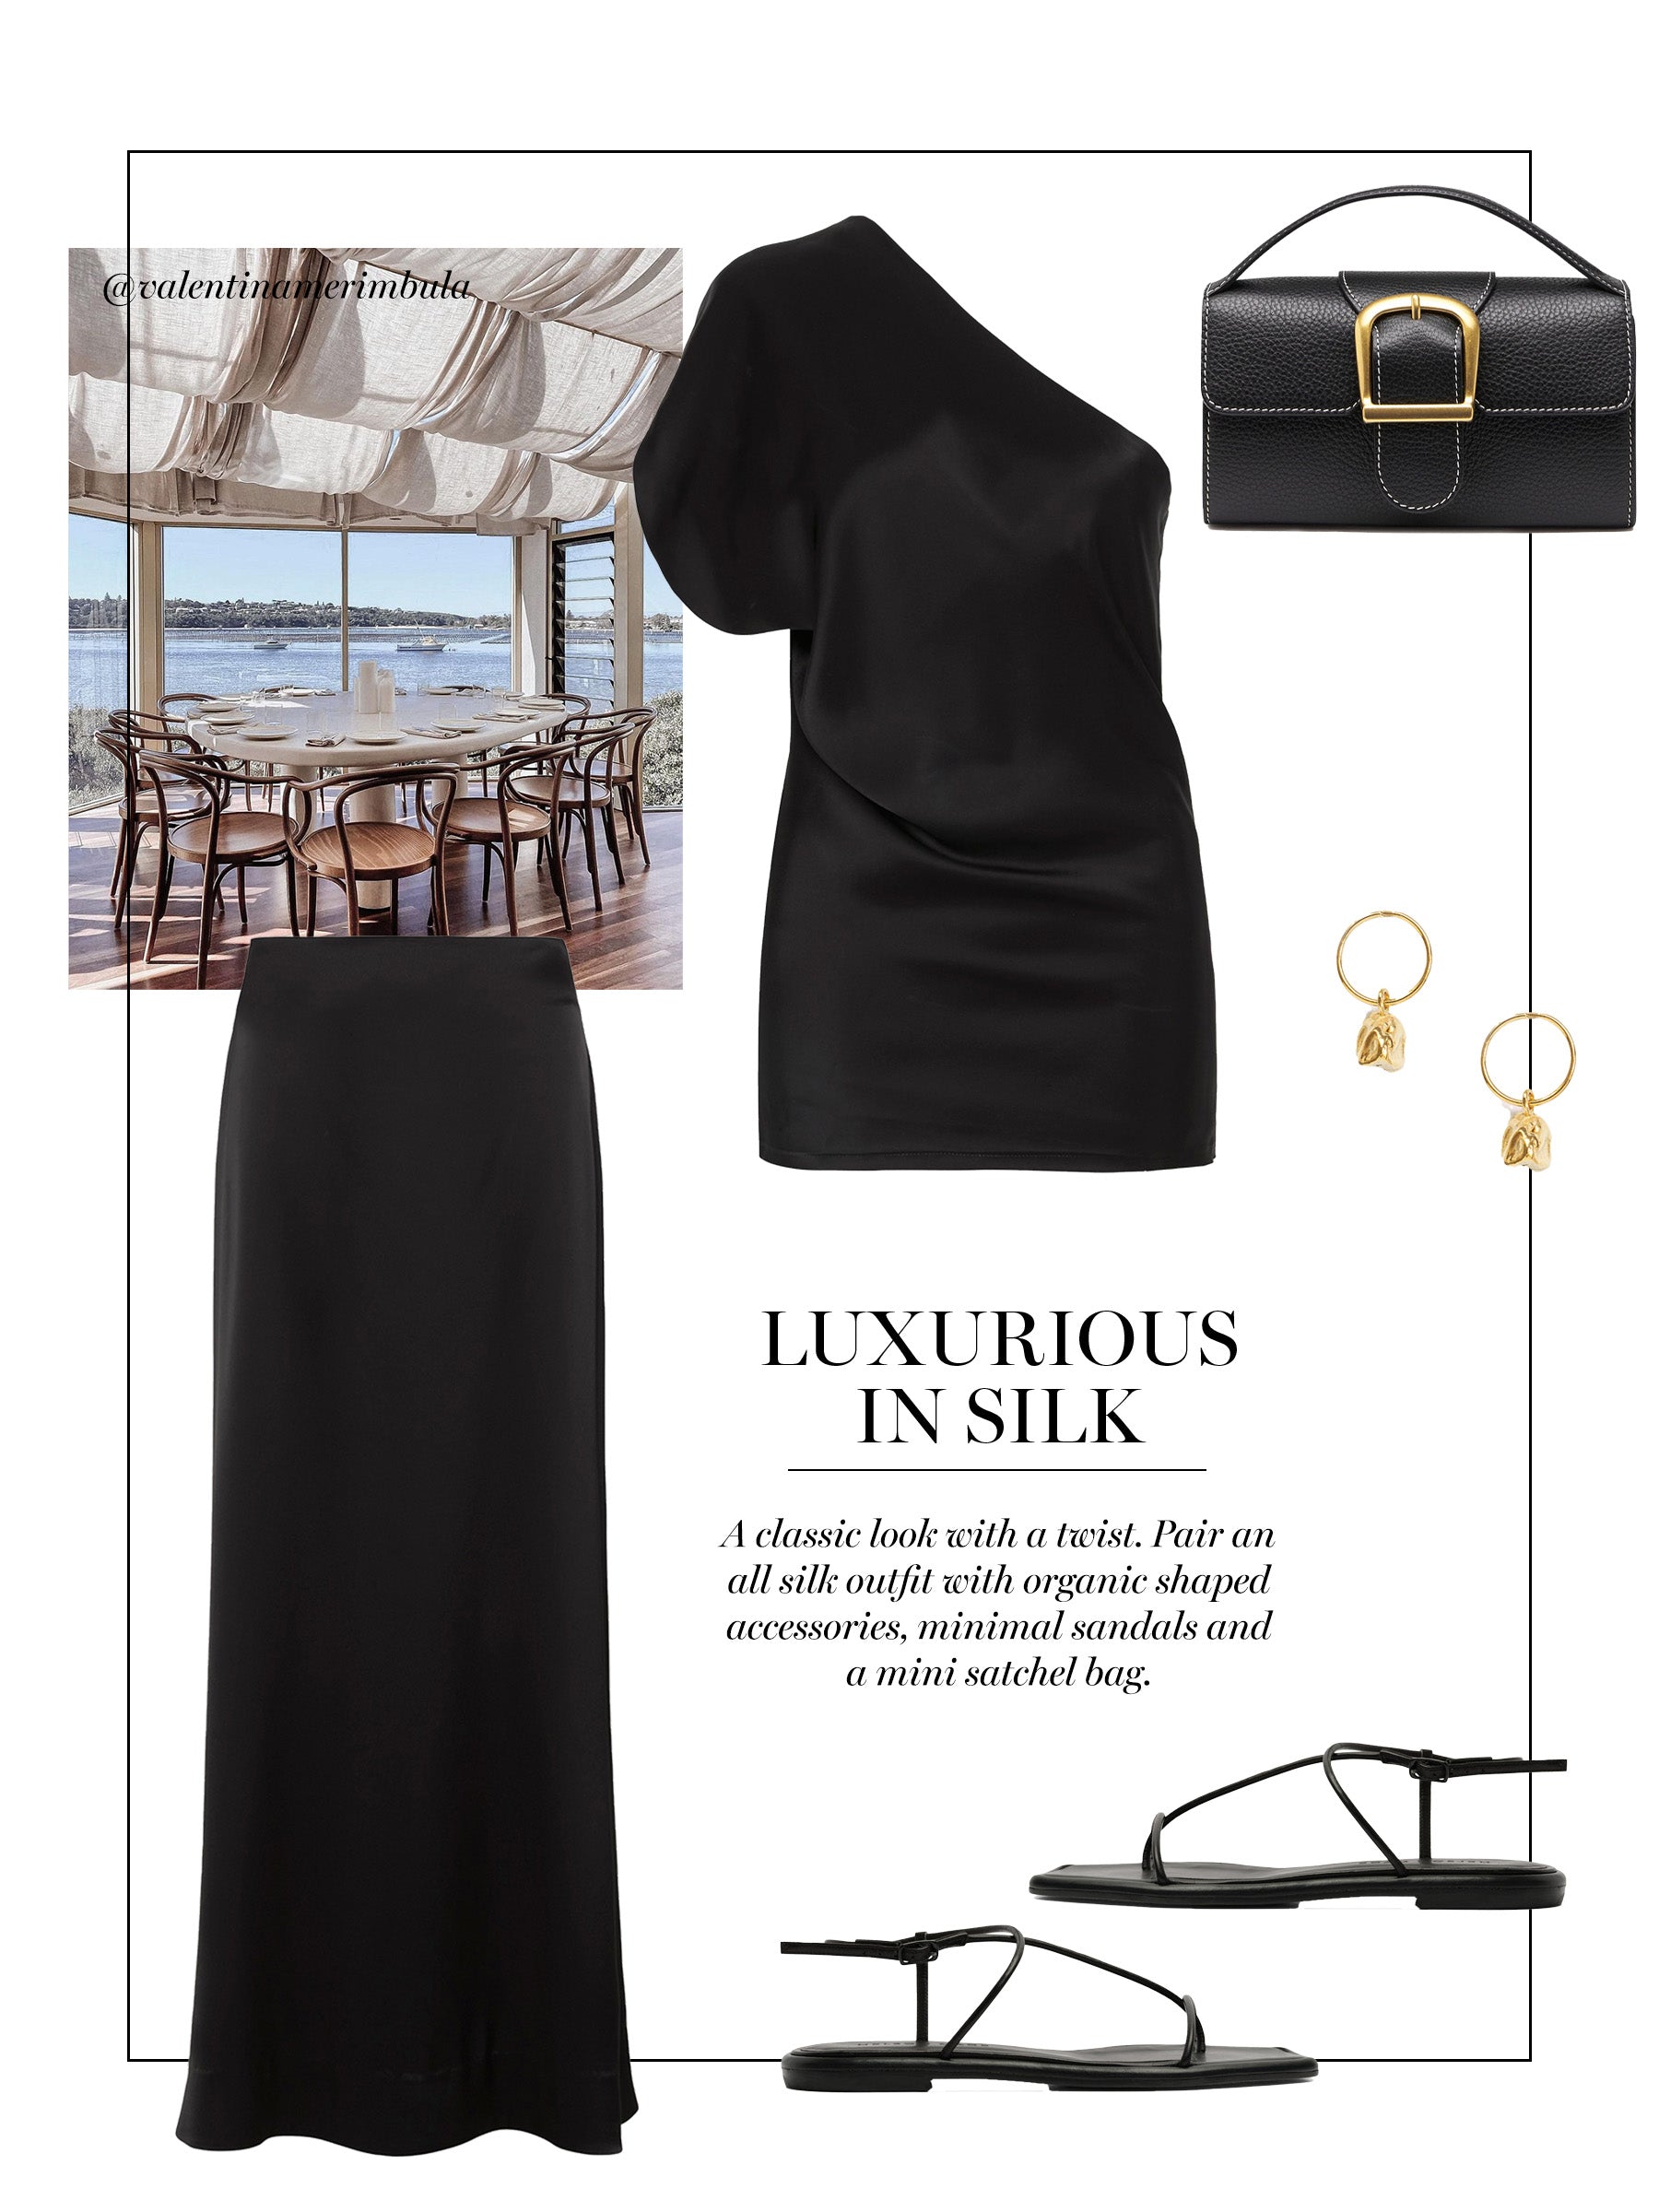 Luxurious in all black silk with classic accessories